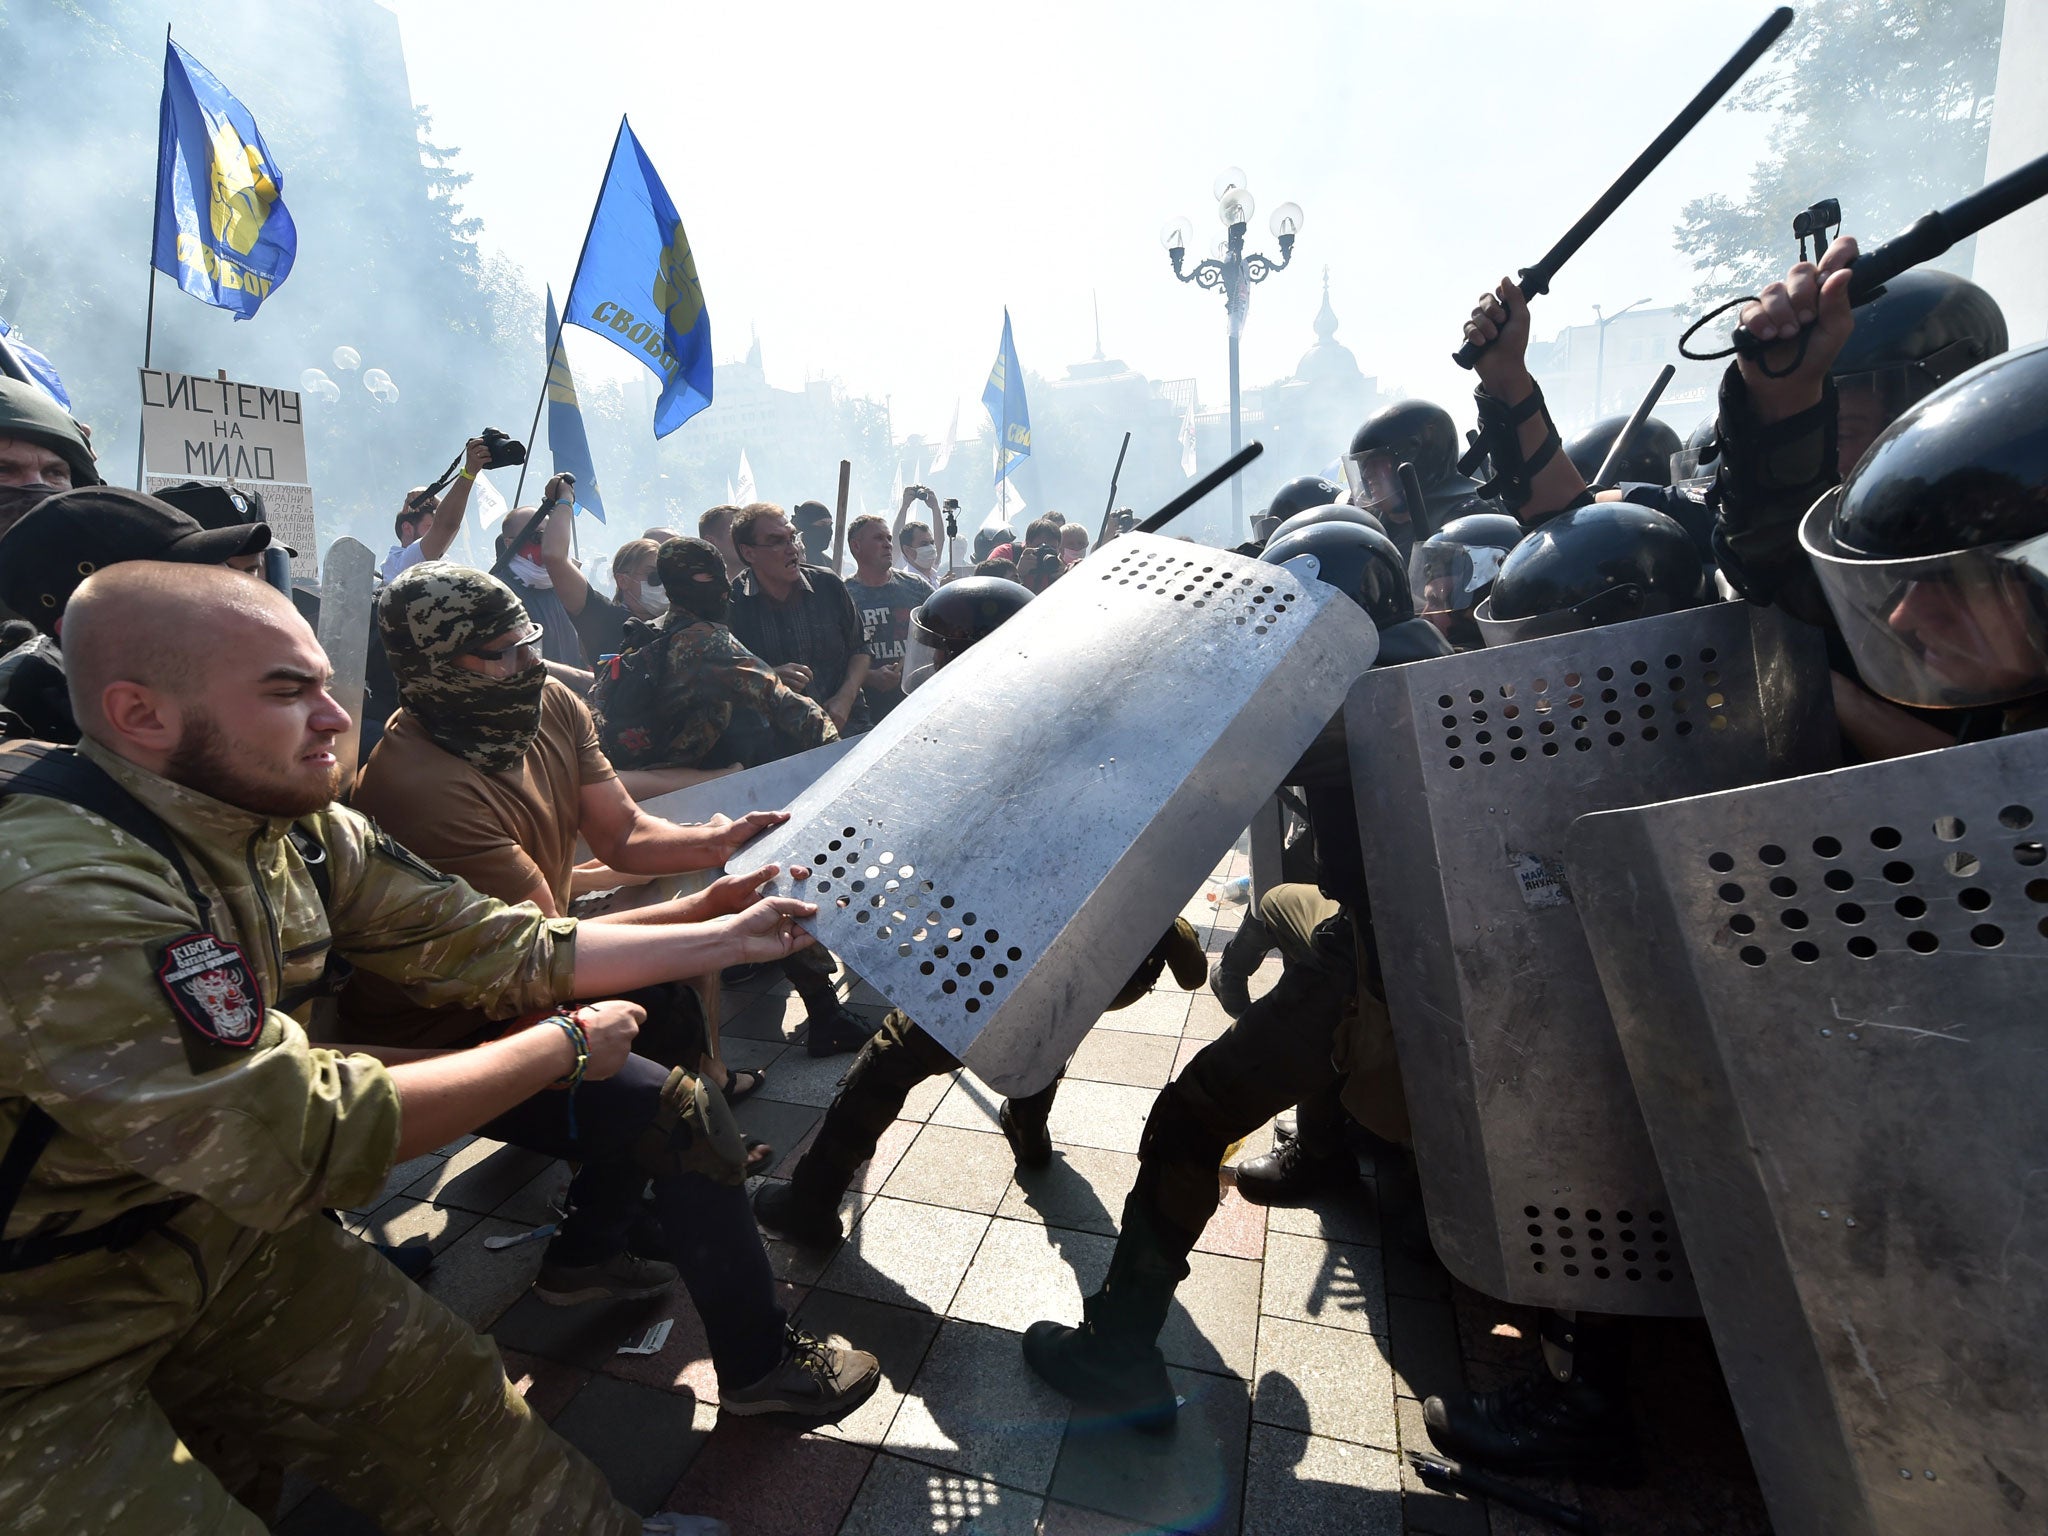 Fractured society: uniformed Ukrainian nationalist activists clash with police officers in front of the parliament in Kiev in August this year